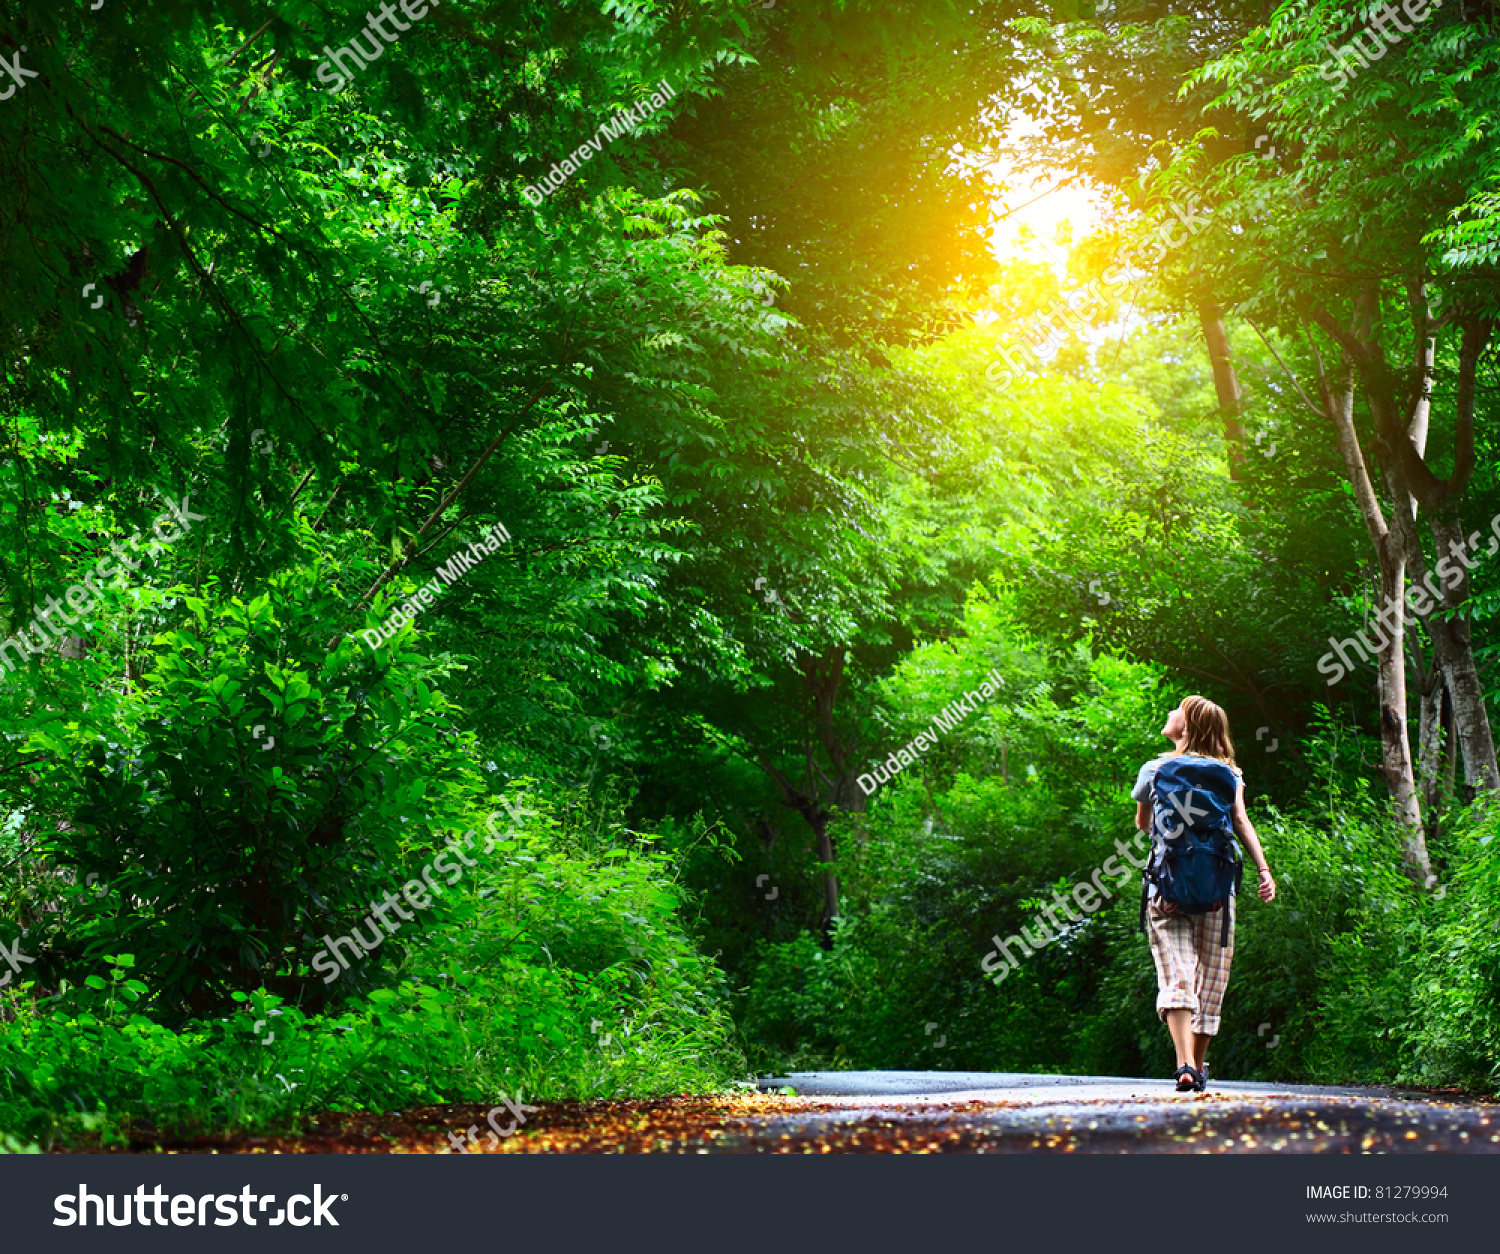 Young woman walking on green asphalt road in forest #81279994